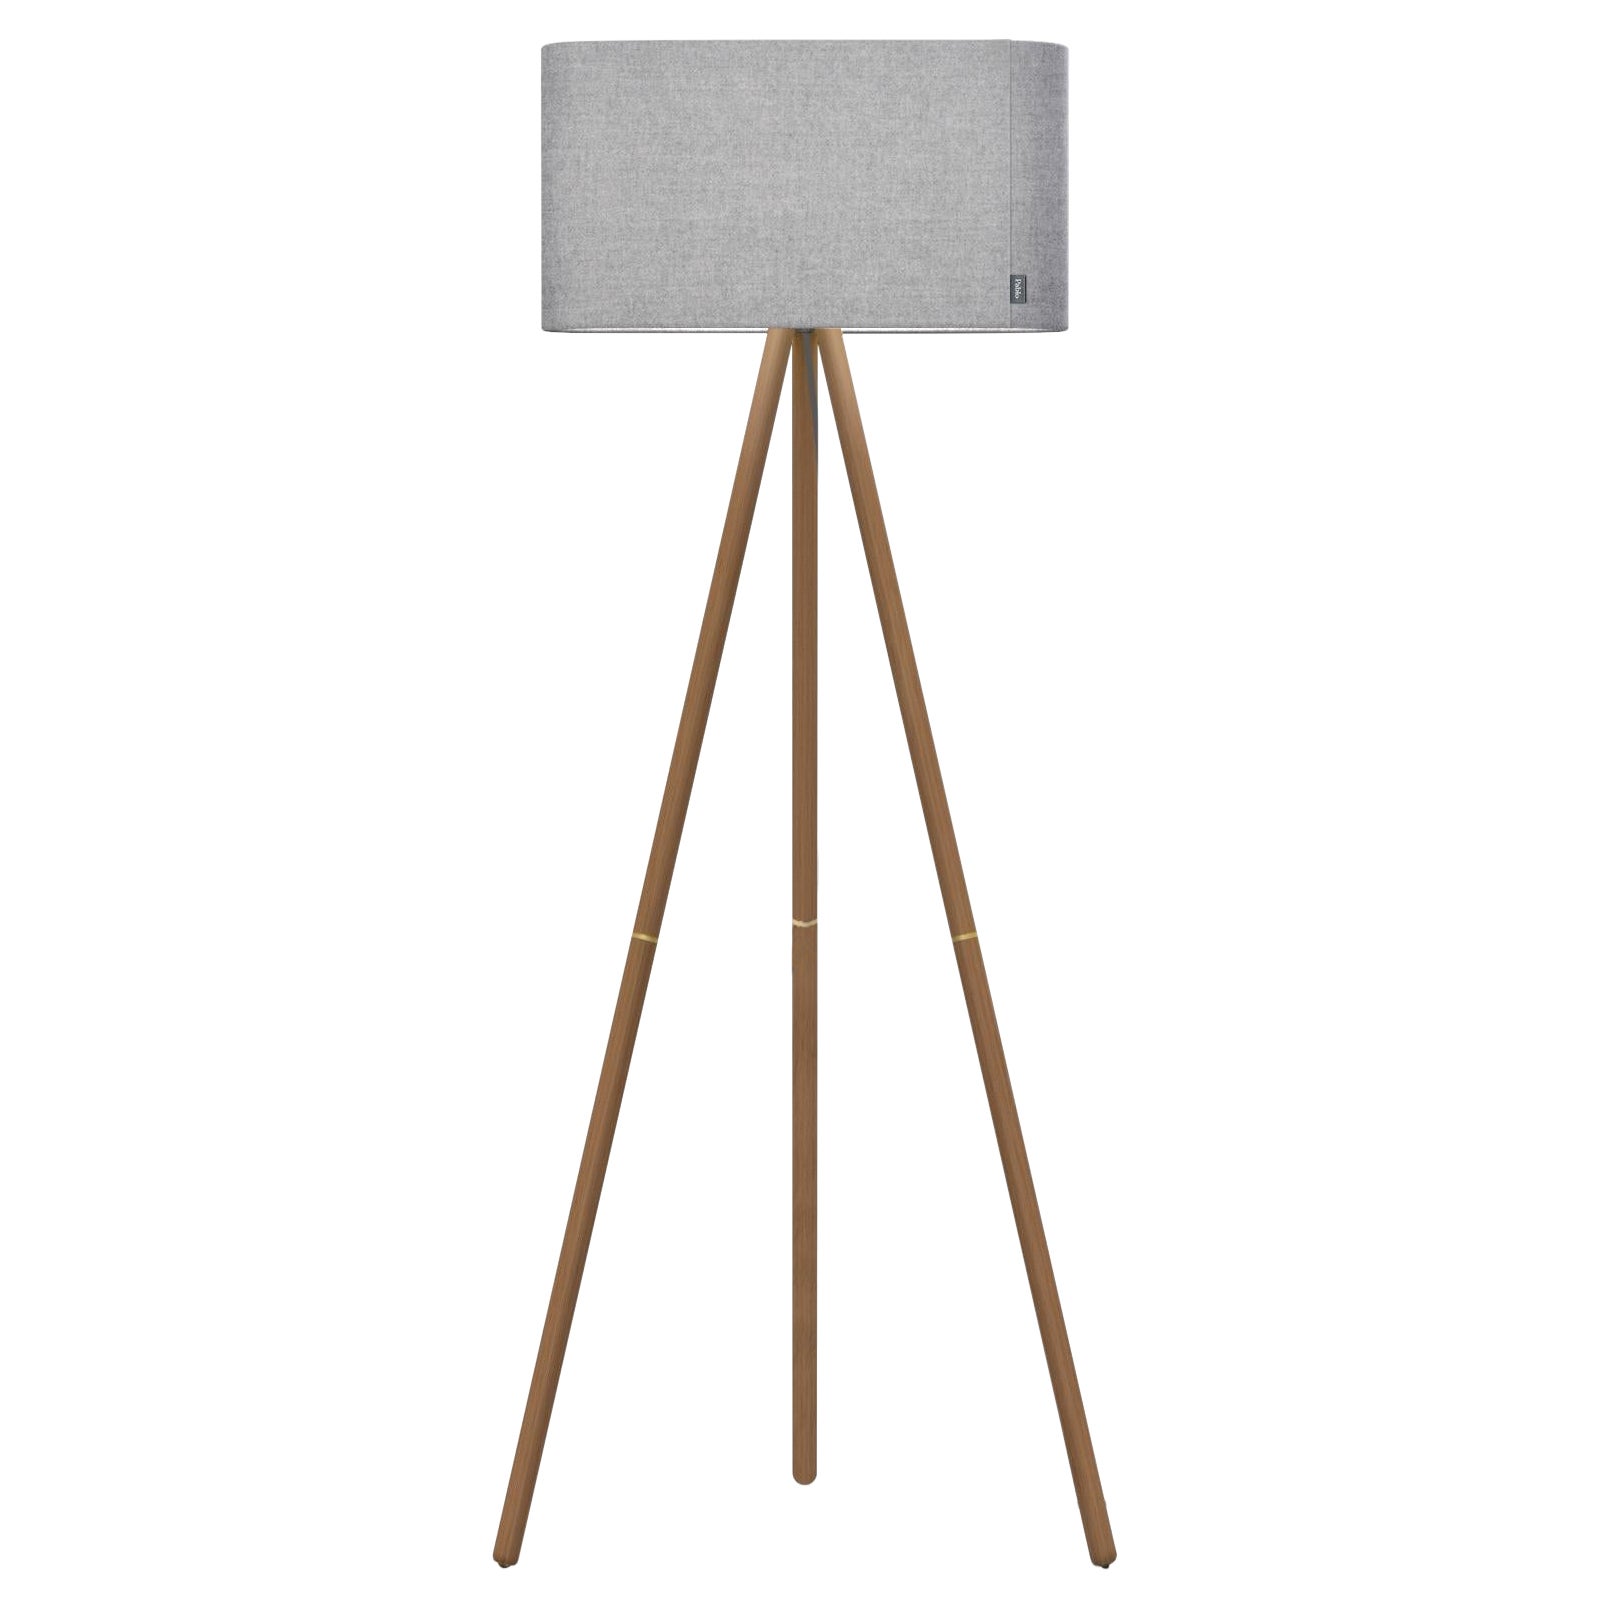 Belmont Floor Lamp in Silverdale with Walnut Legs by Pablo Designs For Sale